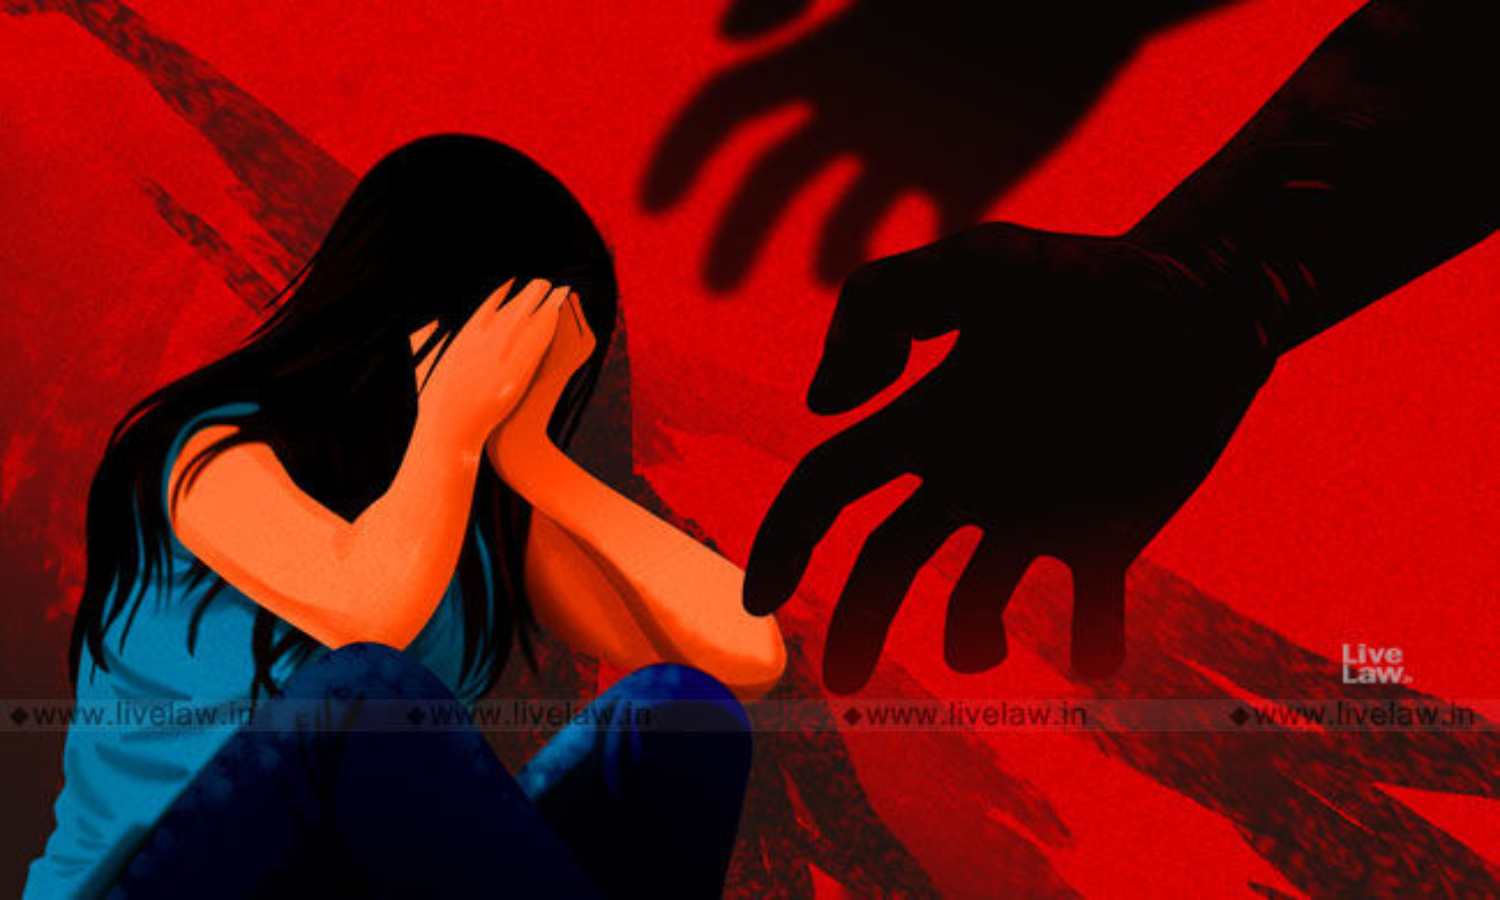 Kerala Reap Sex - Corrective Rape: Inside India's Obsession With Heterosexuality